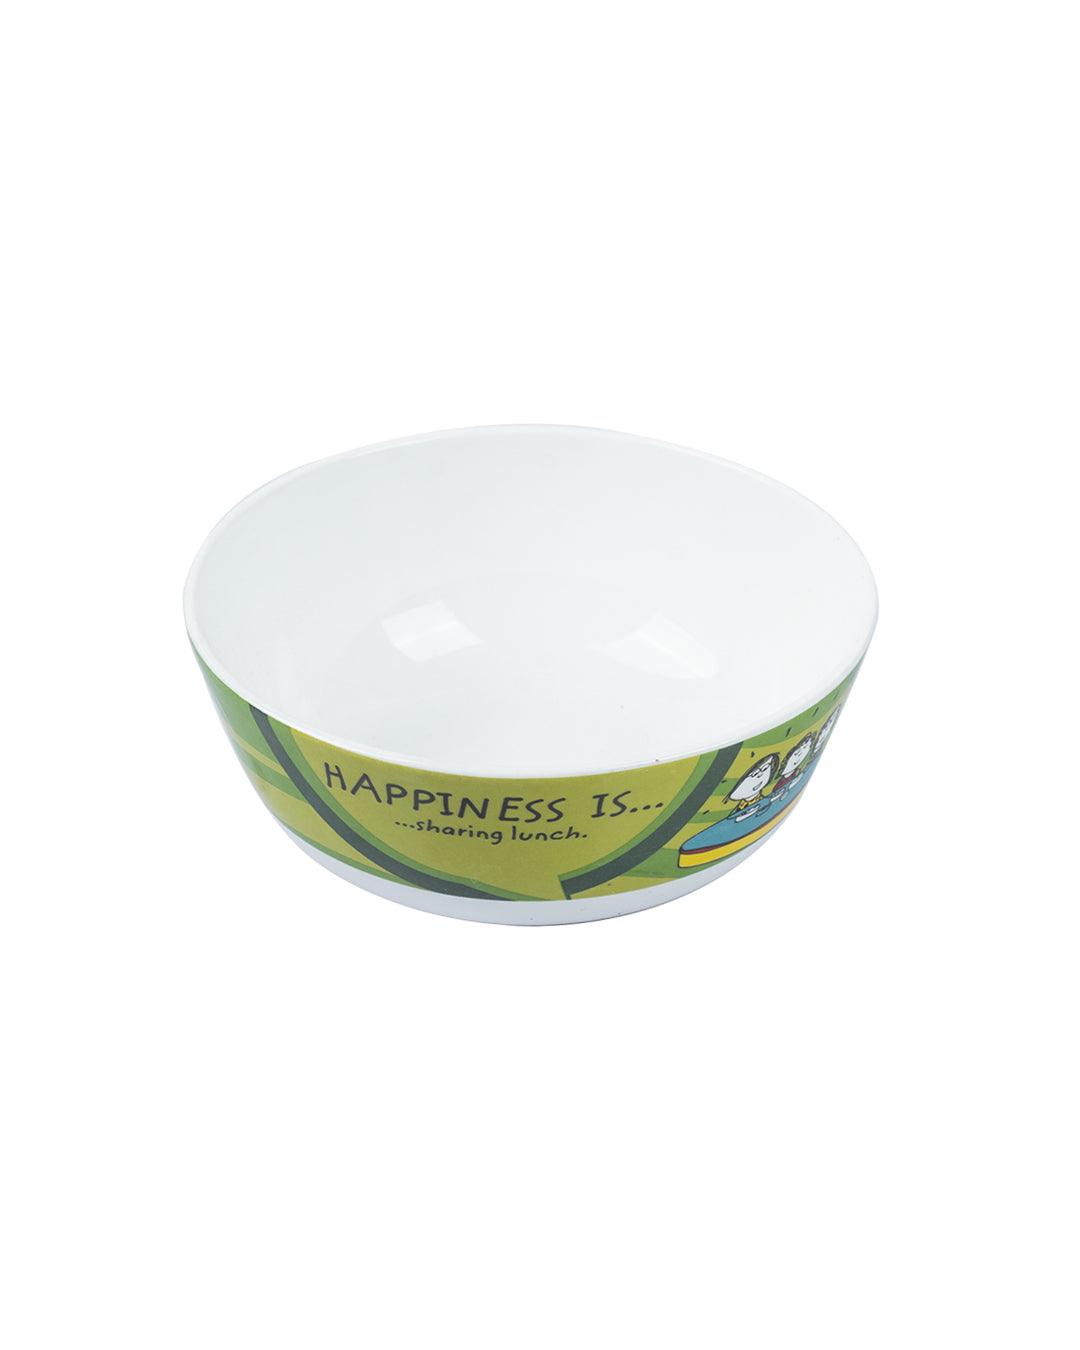 Market 99 - 'HAPPINESS IS … sharing lunch' Graphic Print Serving Bowl Katoris In Ceramic (Set of 4, 340 mL) - MARKET 99